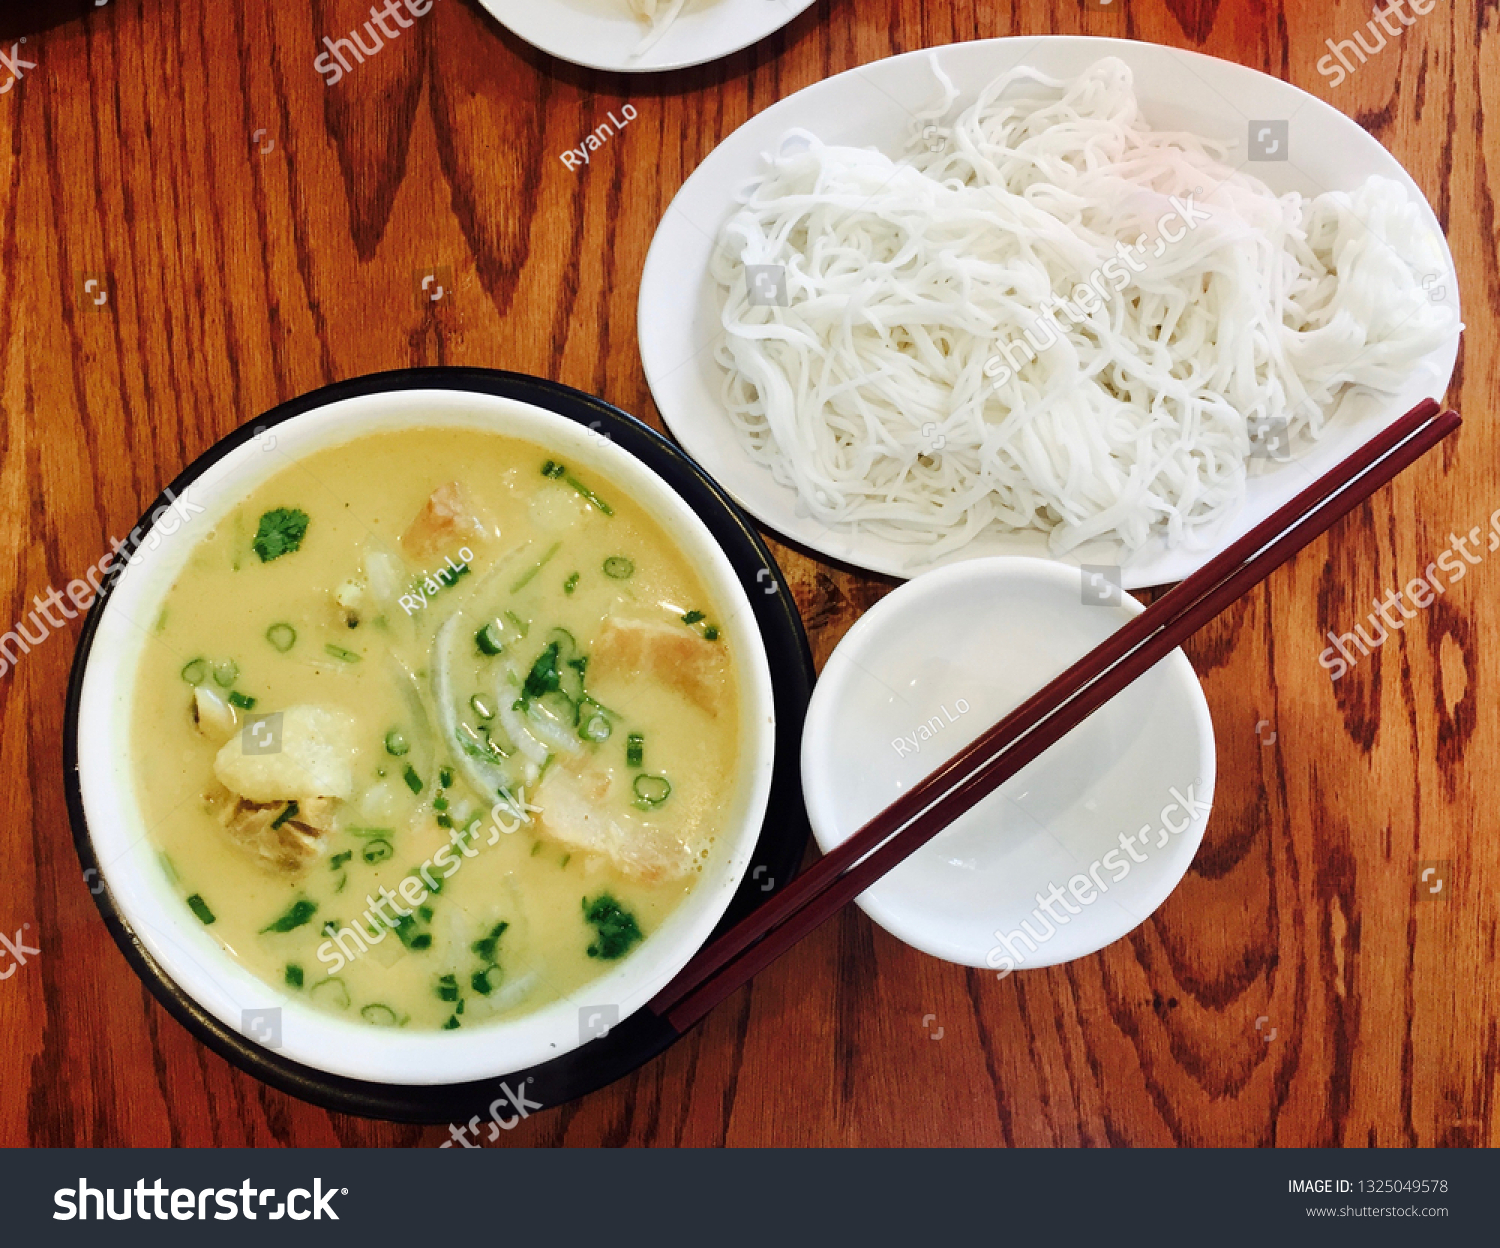 Chicken Curry Noodle Soup Bun Cari Food And Drink Stock Image